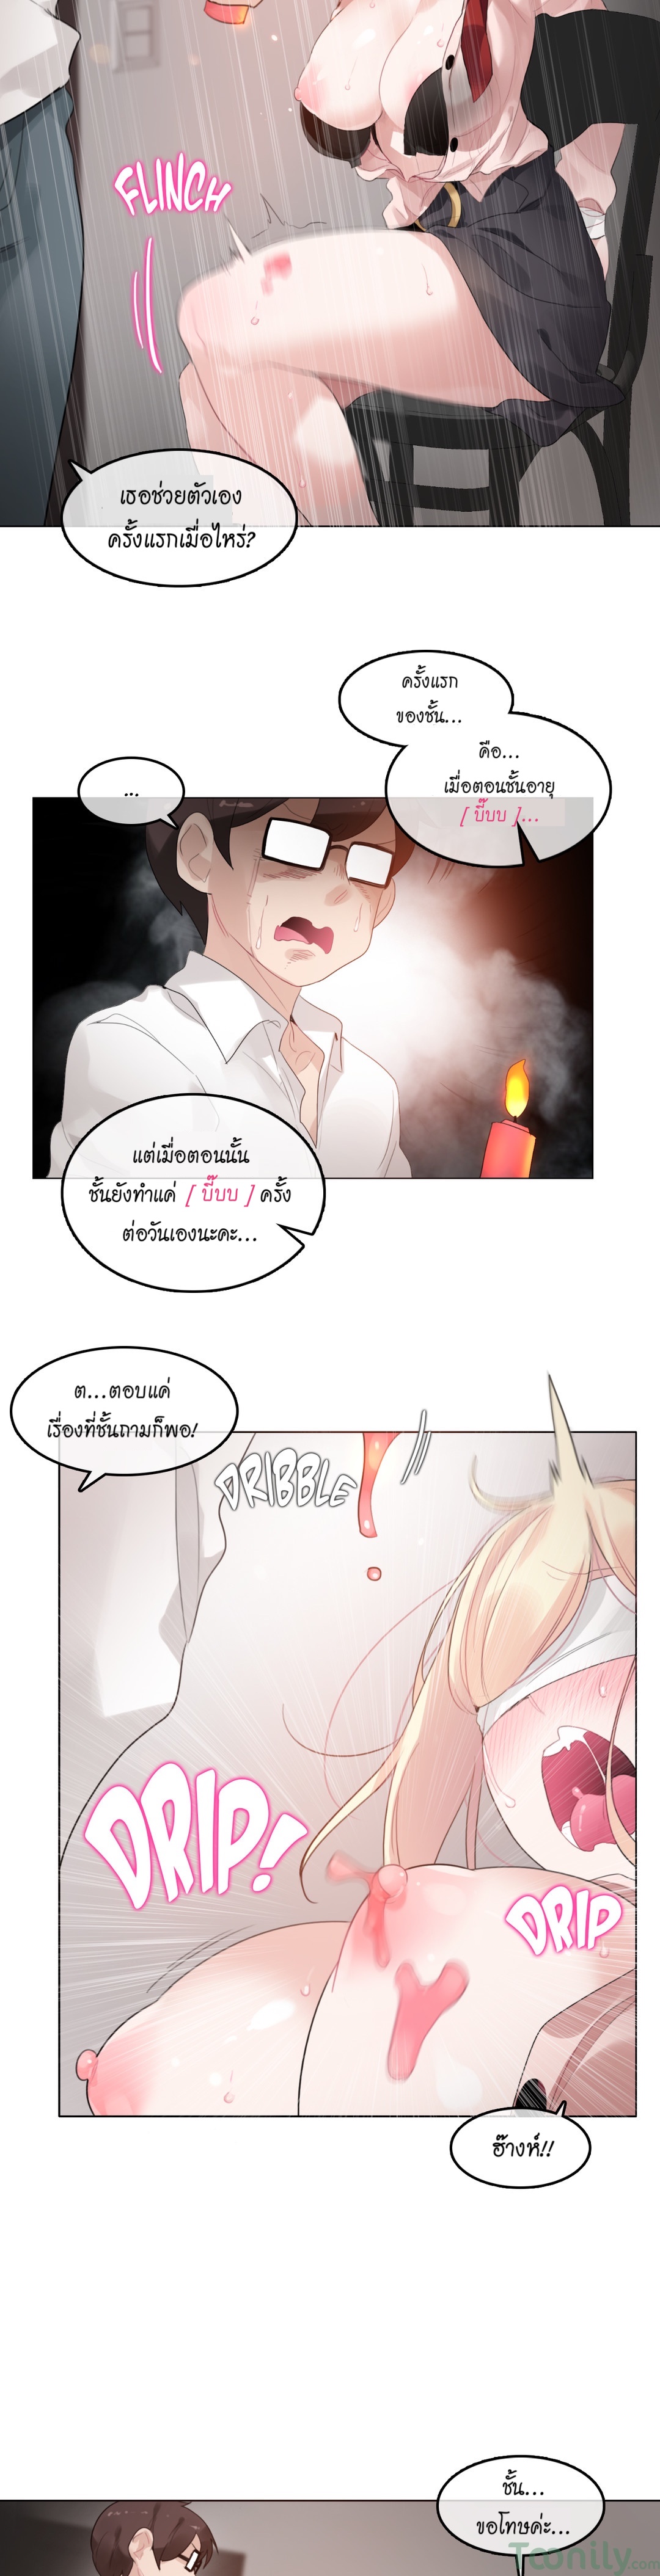 A Pervert’s Daily Life60 (4)